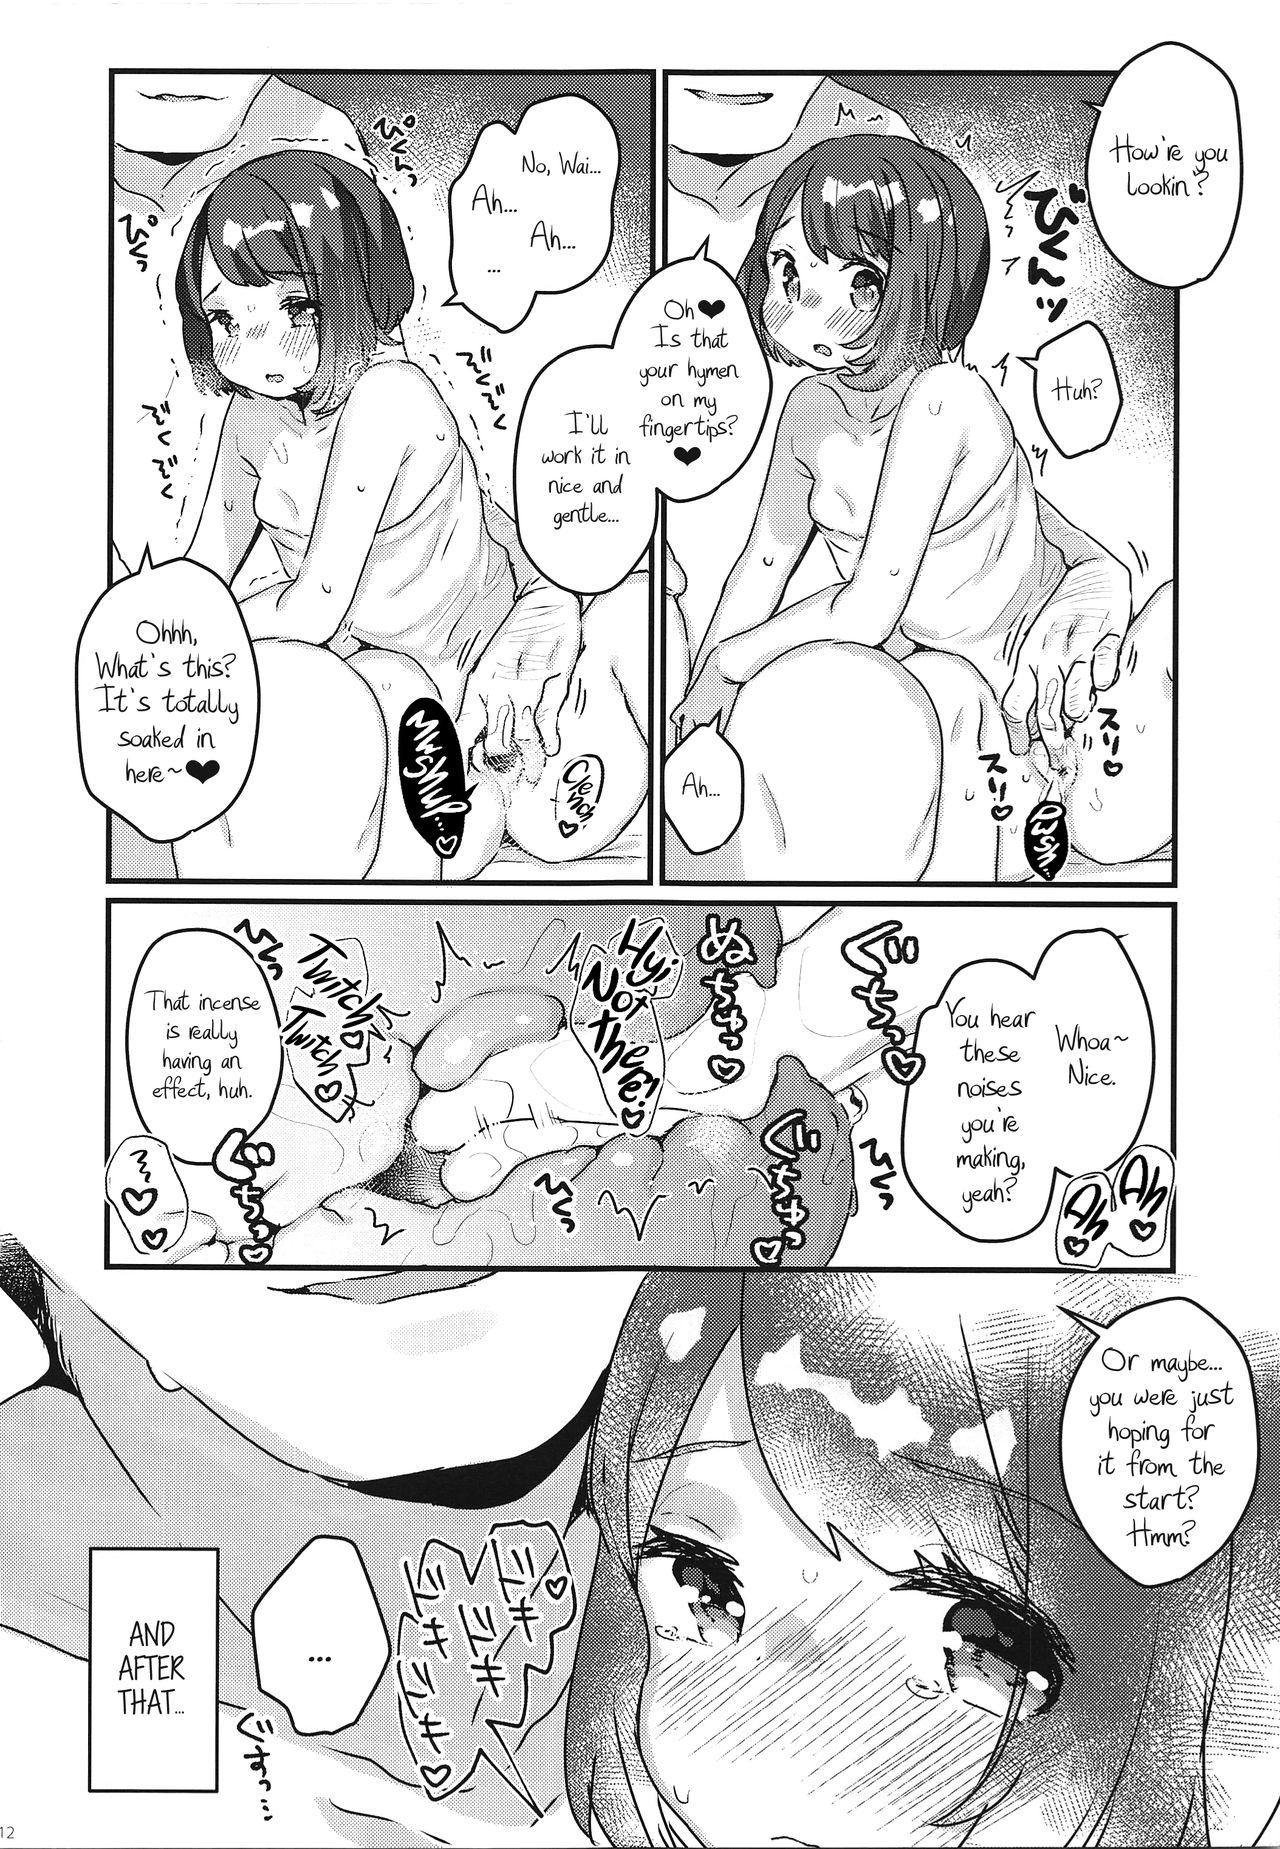 Made "Datte Fuku, Taka Iindamon" | "I Mean, Clothes Are Just so Expensive~" - Pokemon Leather - Page 12